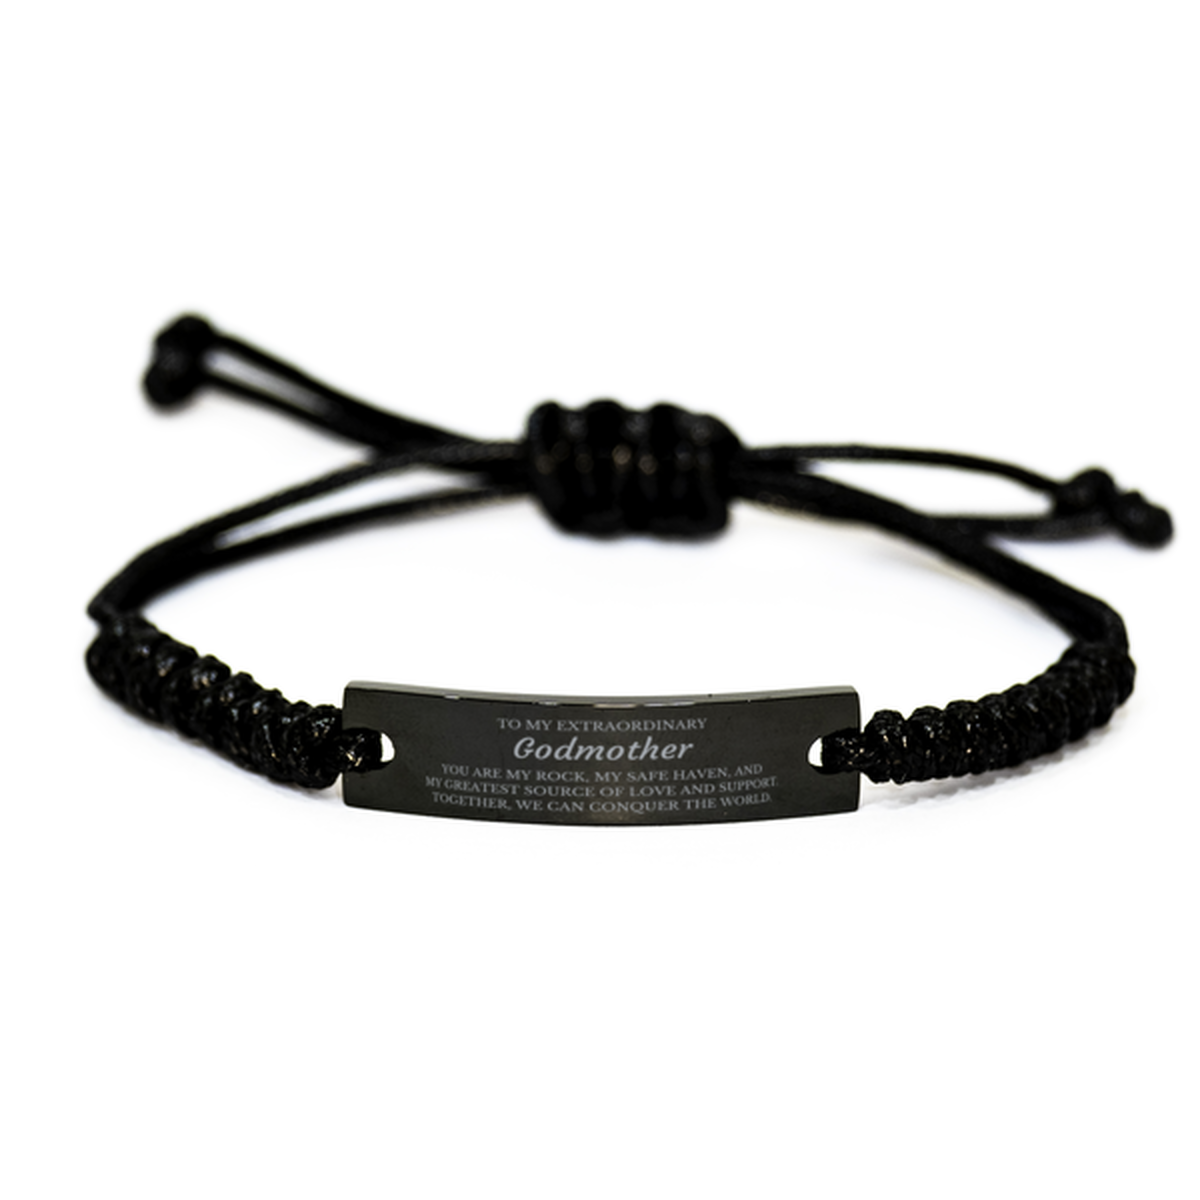 To My Extraordinary Godmother Gifts, Together, we can conquer the world, Birthday Black Rope Bracelet For Godmother, Christmas Gifts For Godmother